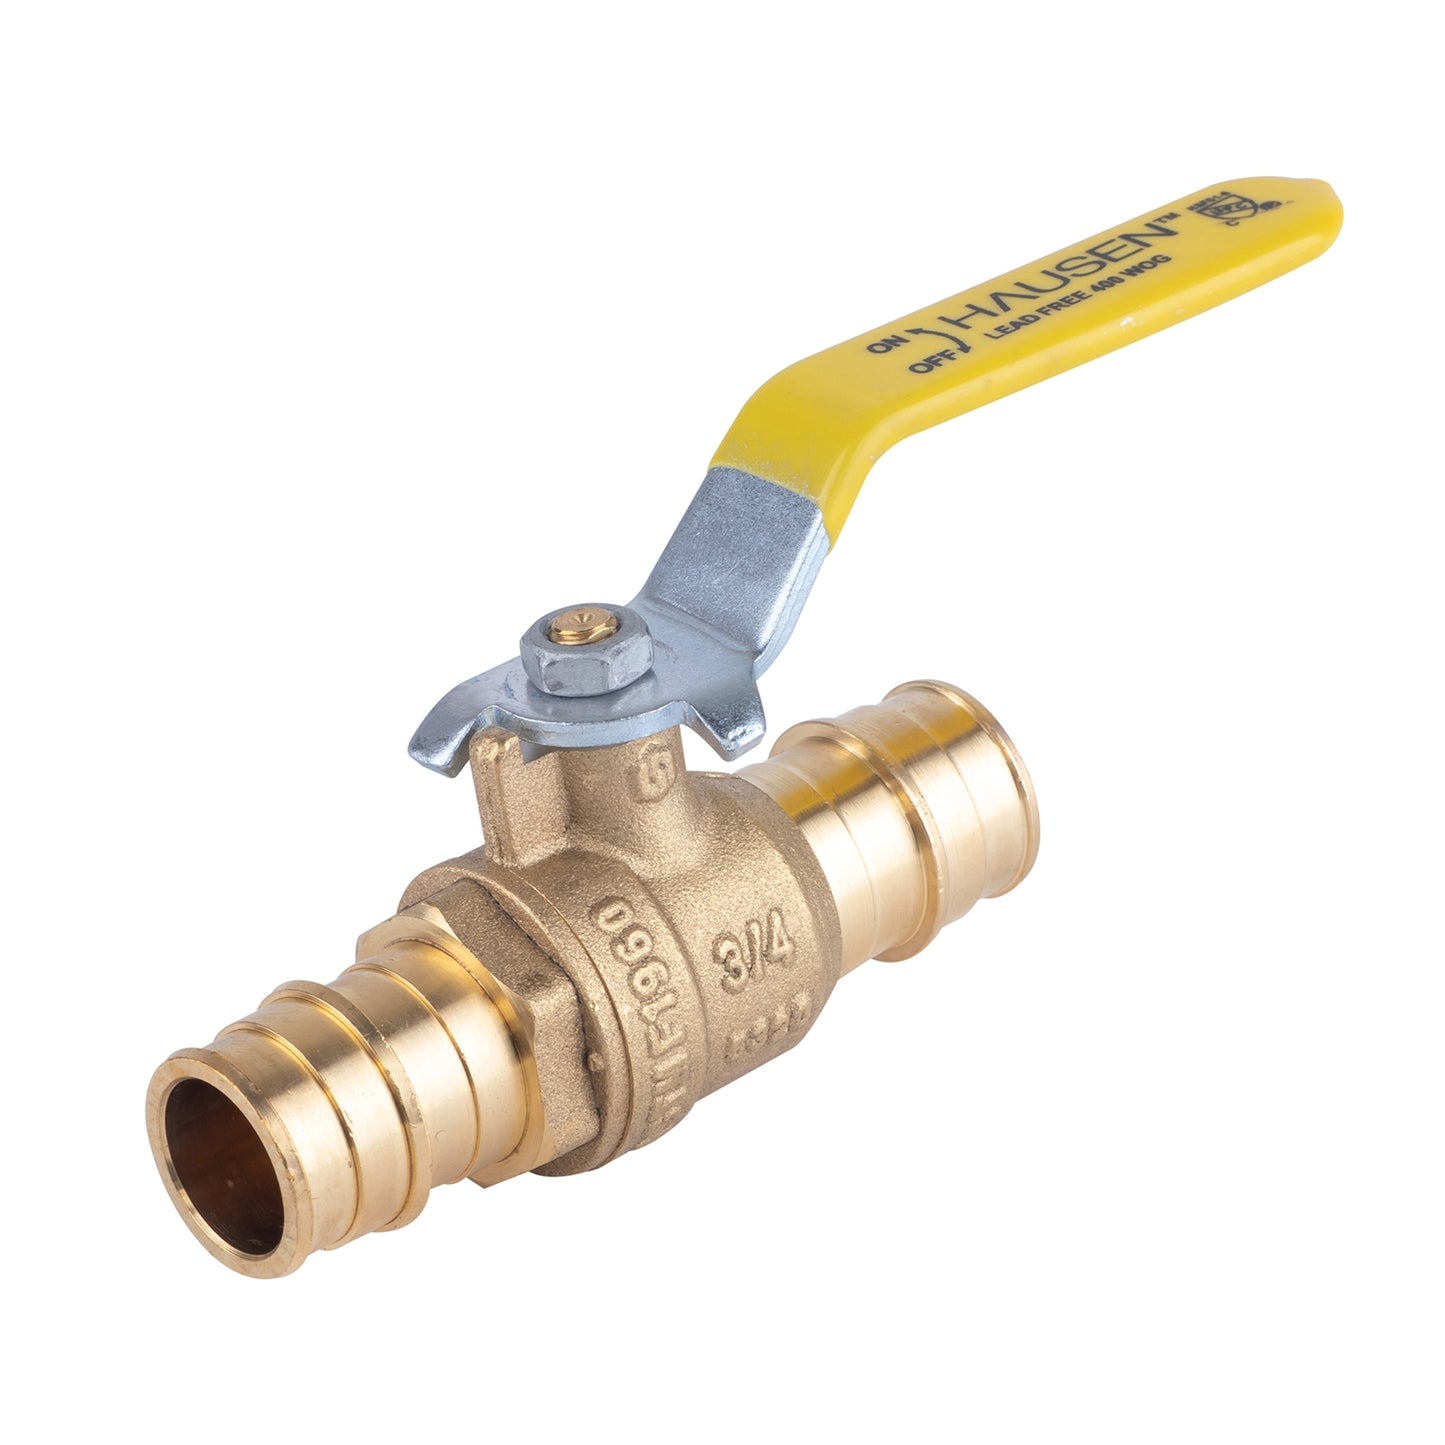 Hausen 3/4-inch PEX Standard Port Brass Ball Valve with PEX Expansion Connection, 1-Pack